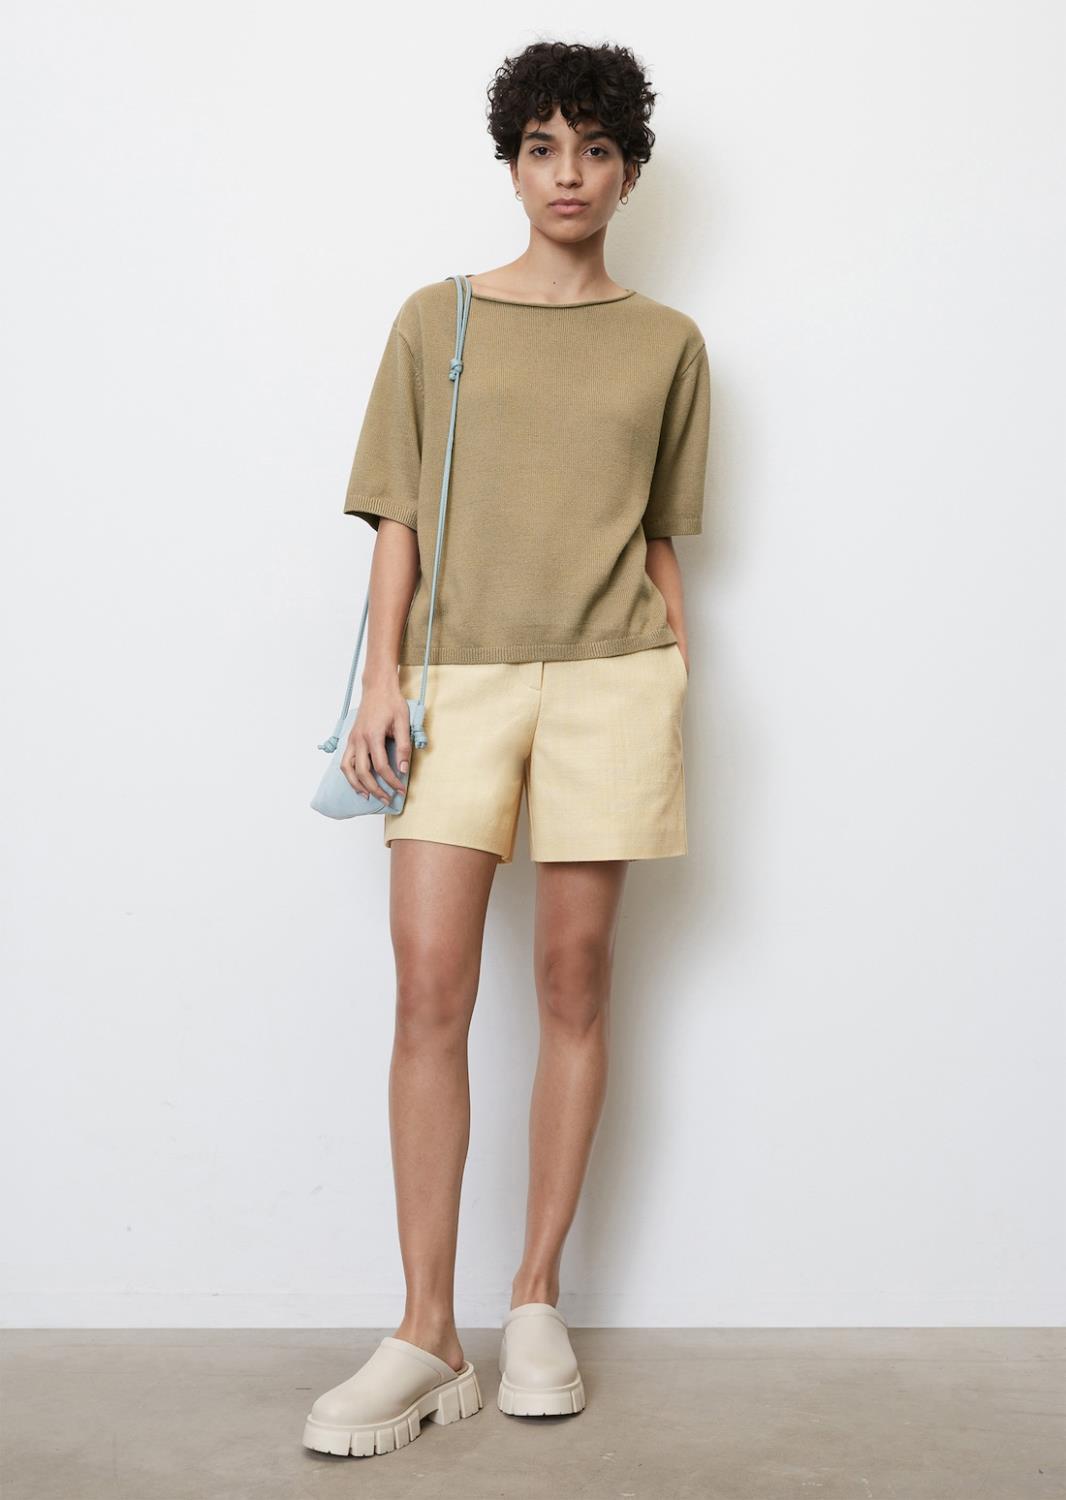 Marco Polo Short Sleeve Knit Jumper